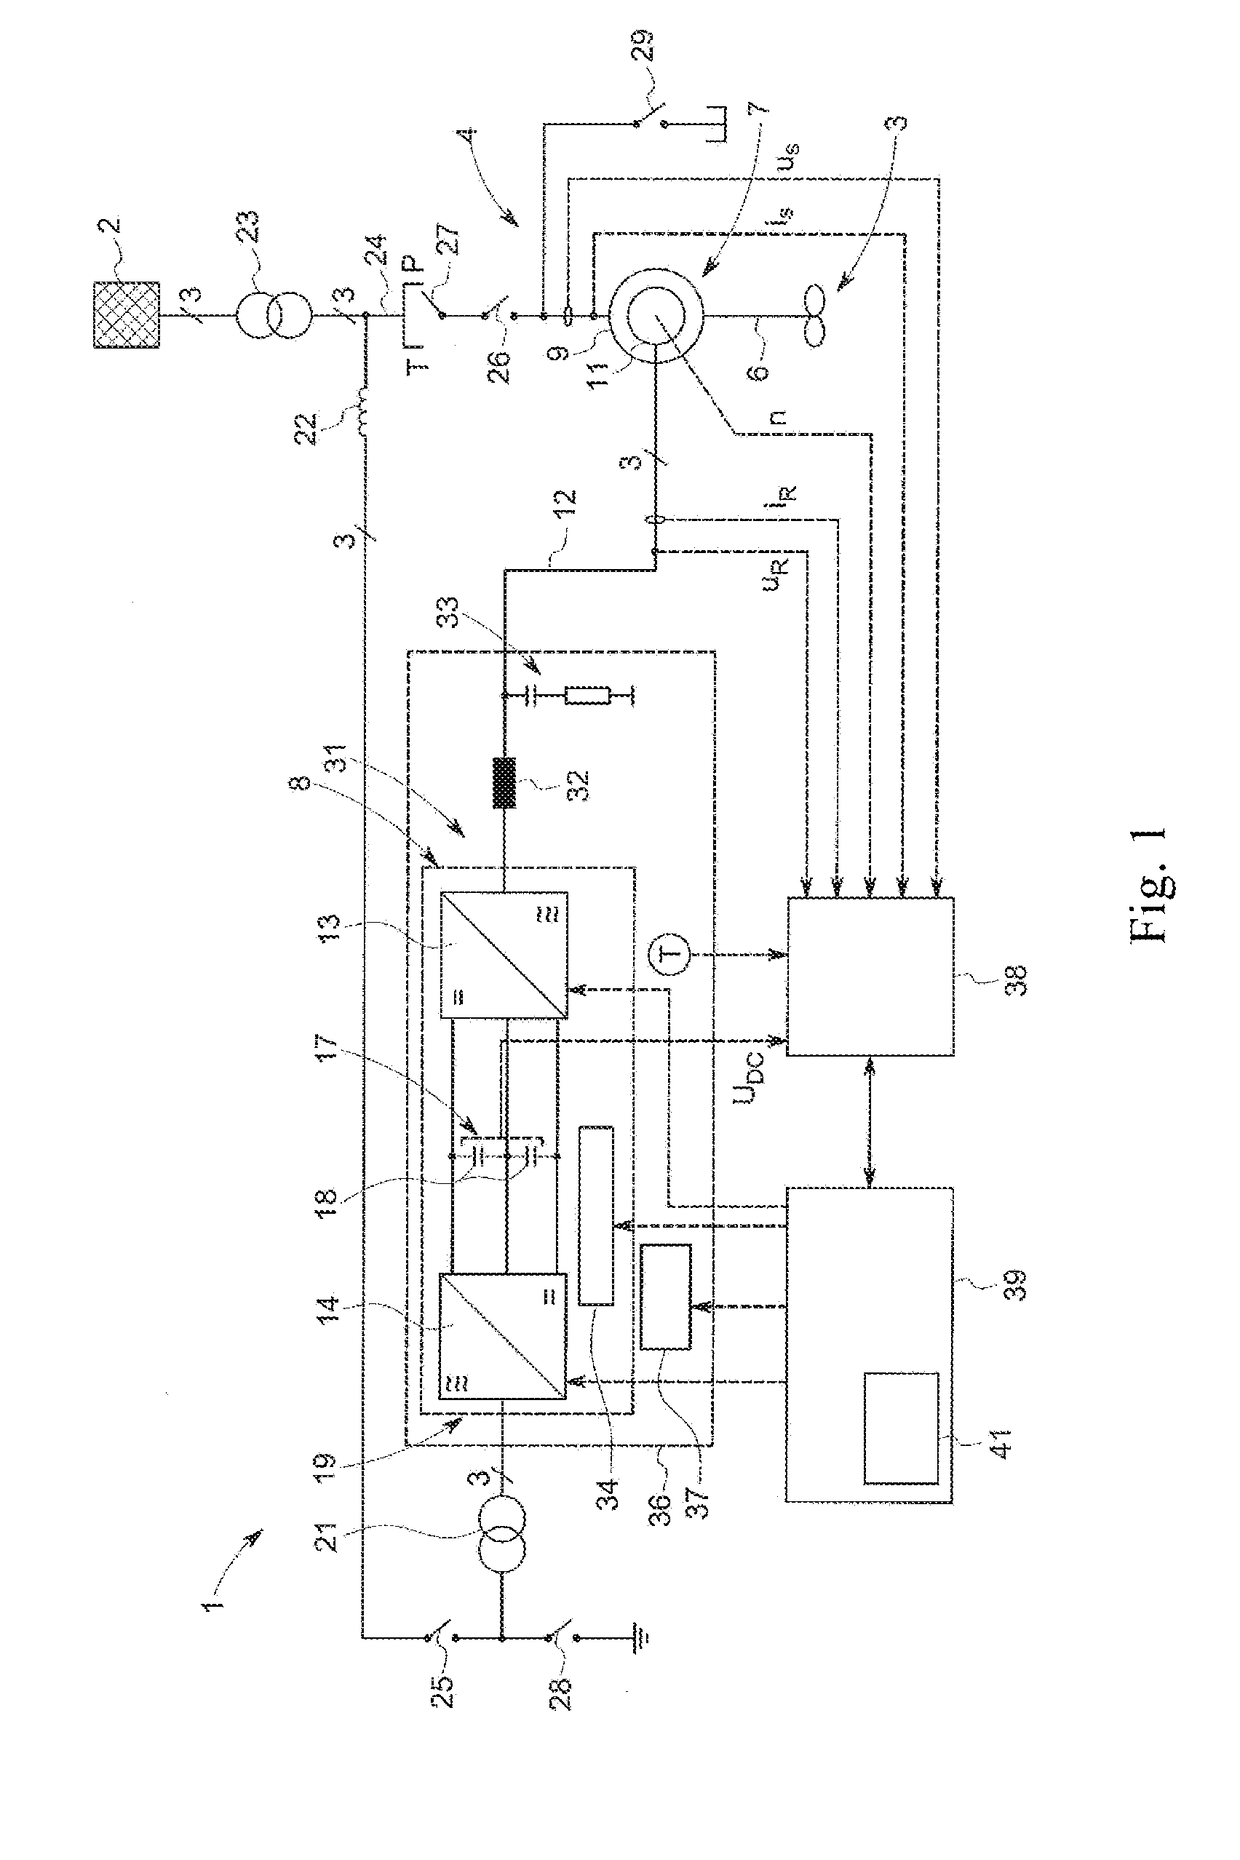 System and method for operating a pumped storage power plant with a double fed induction machine